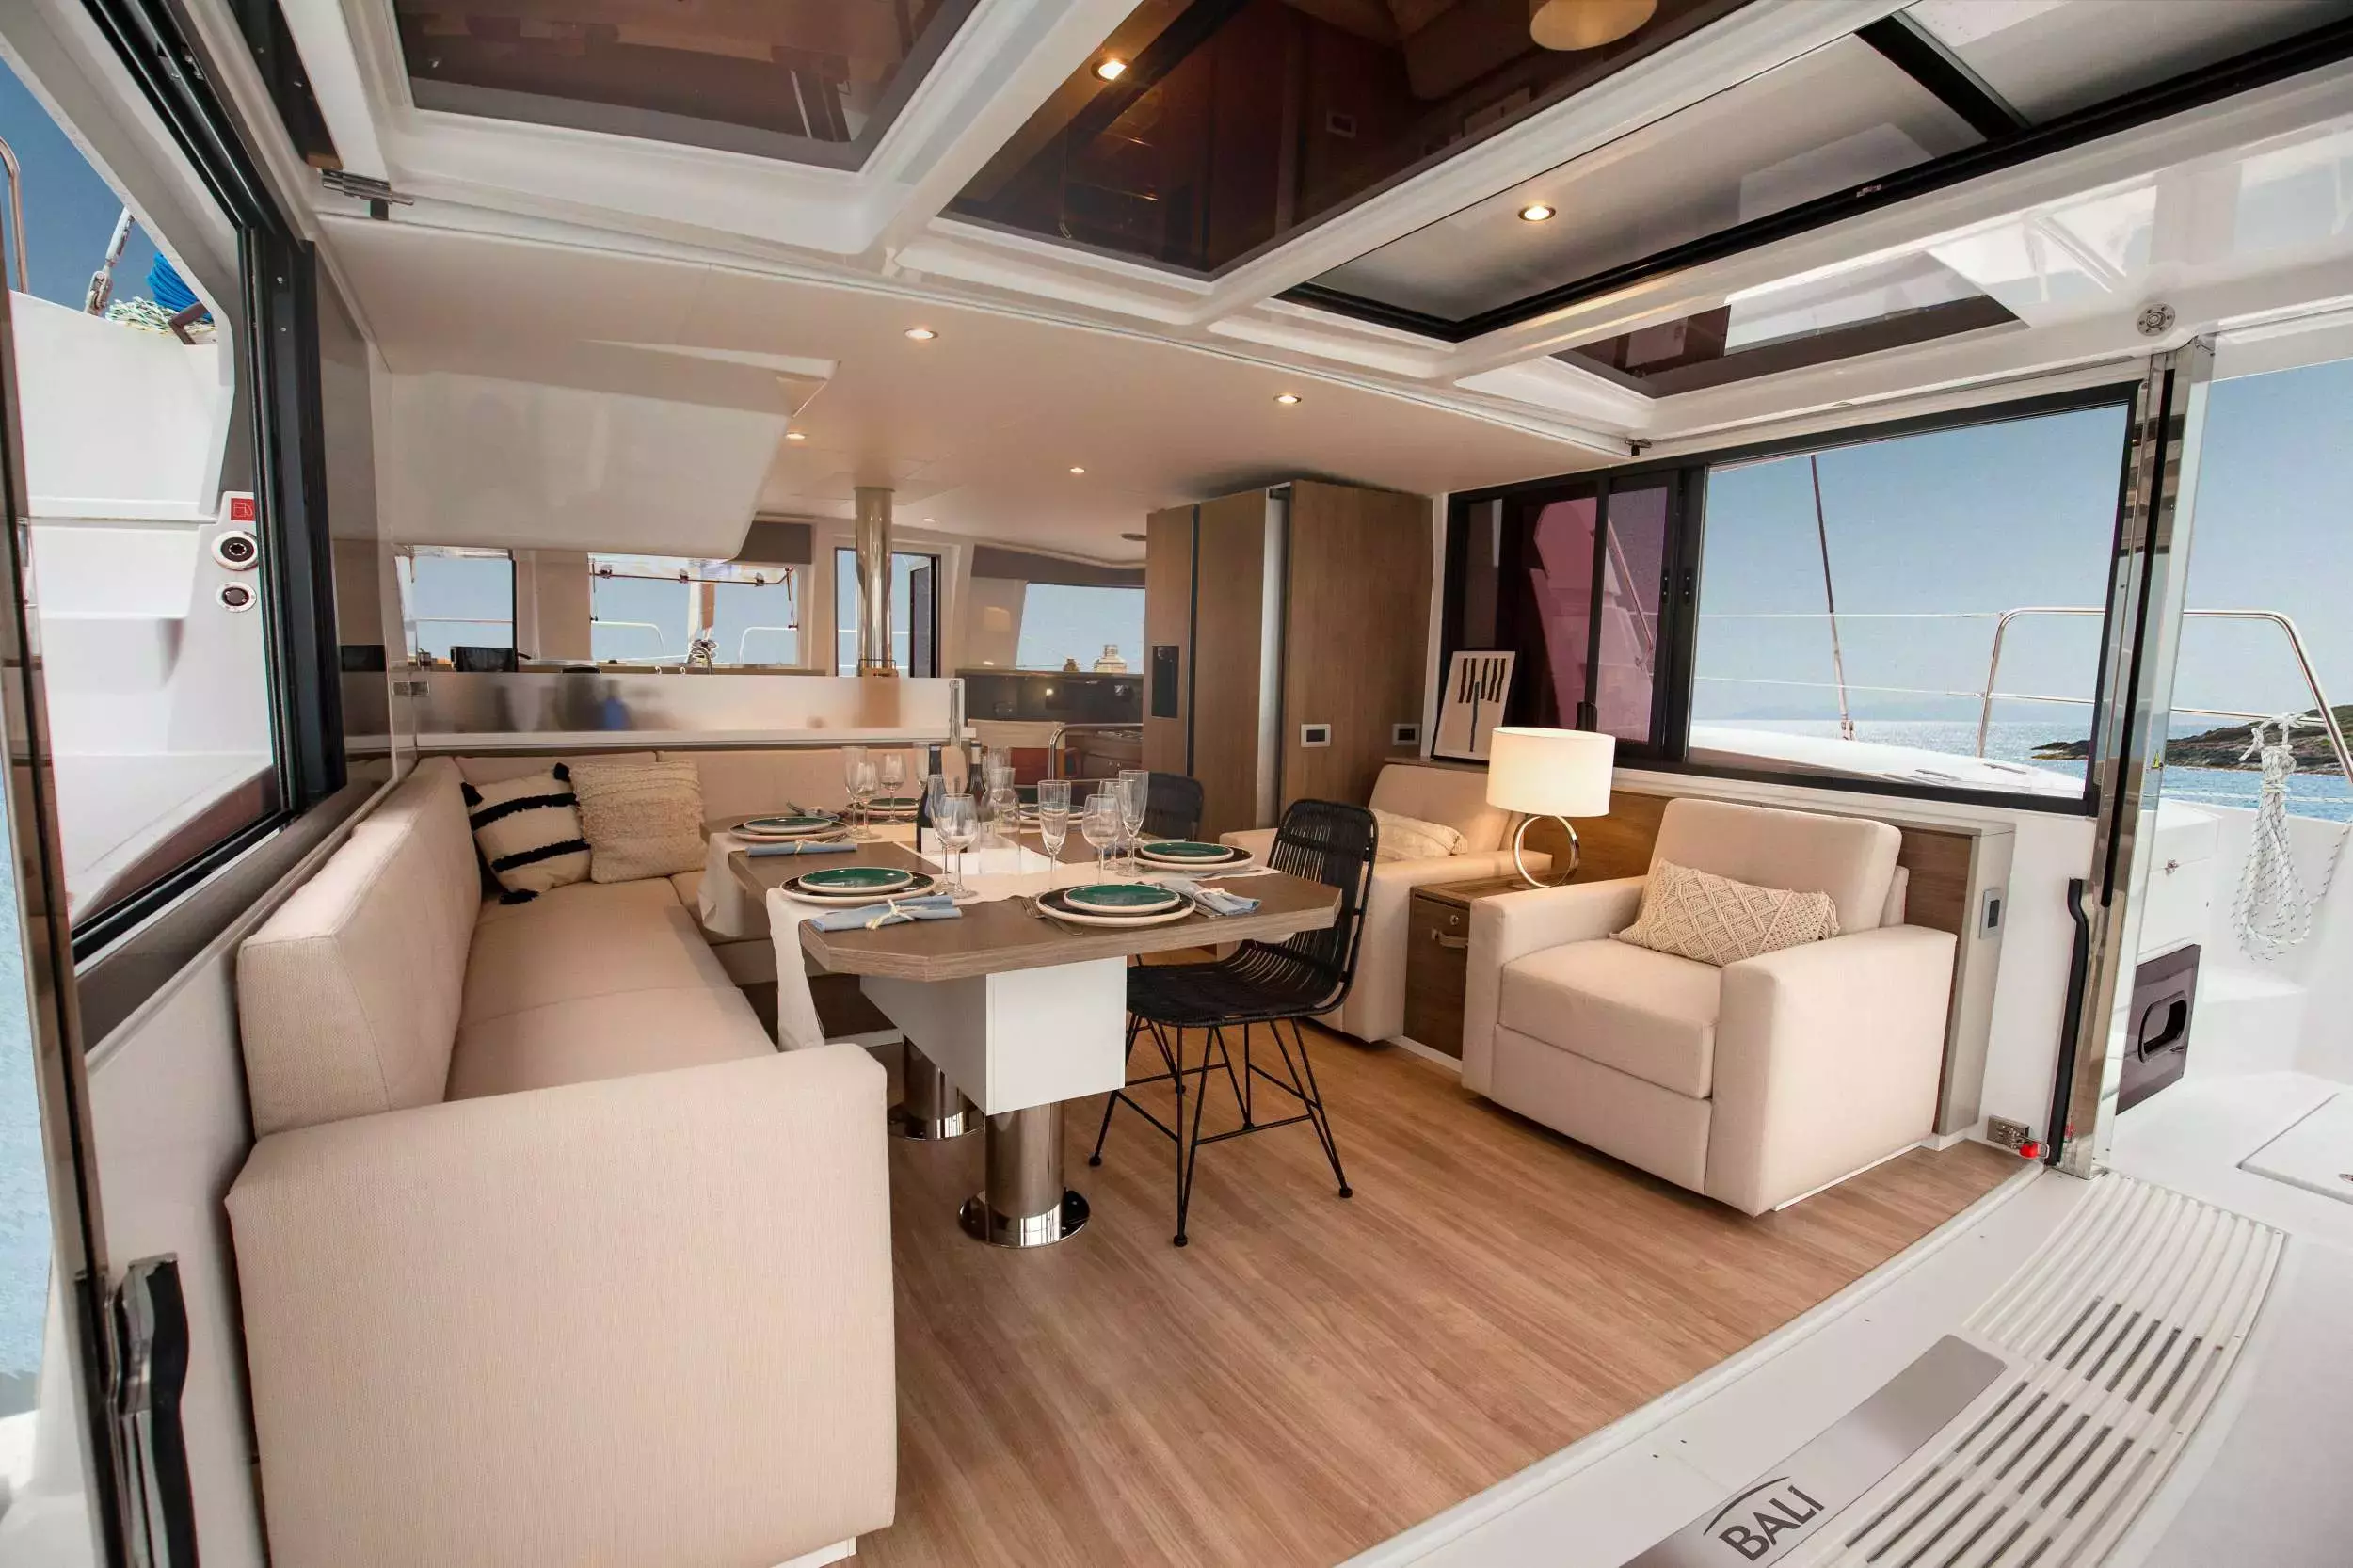 Knowker by Bali Catamarans - Top rates for a Rental of a private Sailing Catamaran in Spain